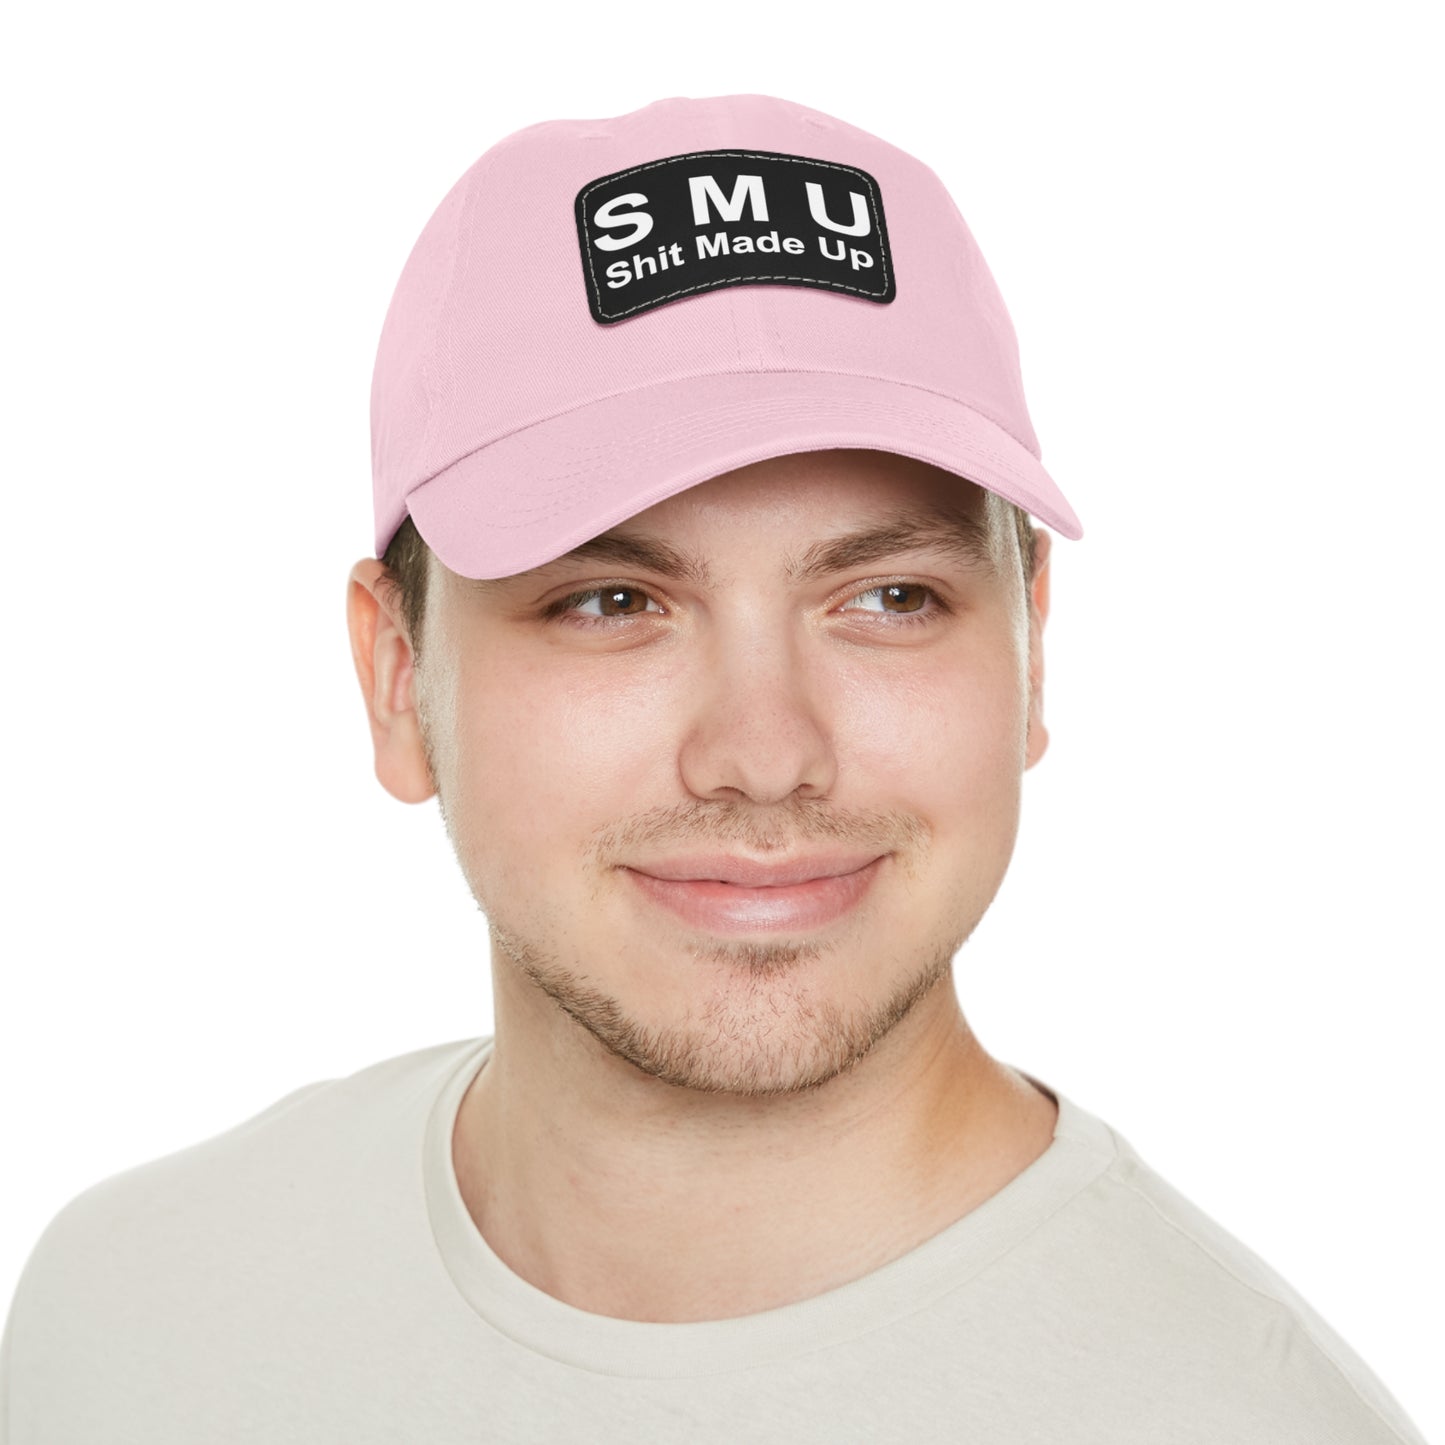 SMU Dad Hat with Leather Patch (Rectangle)